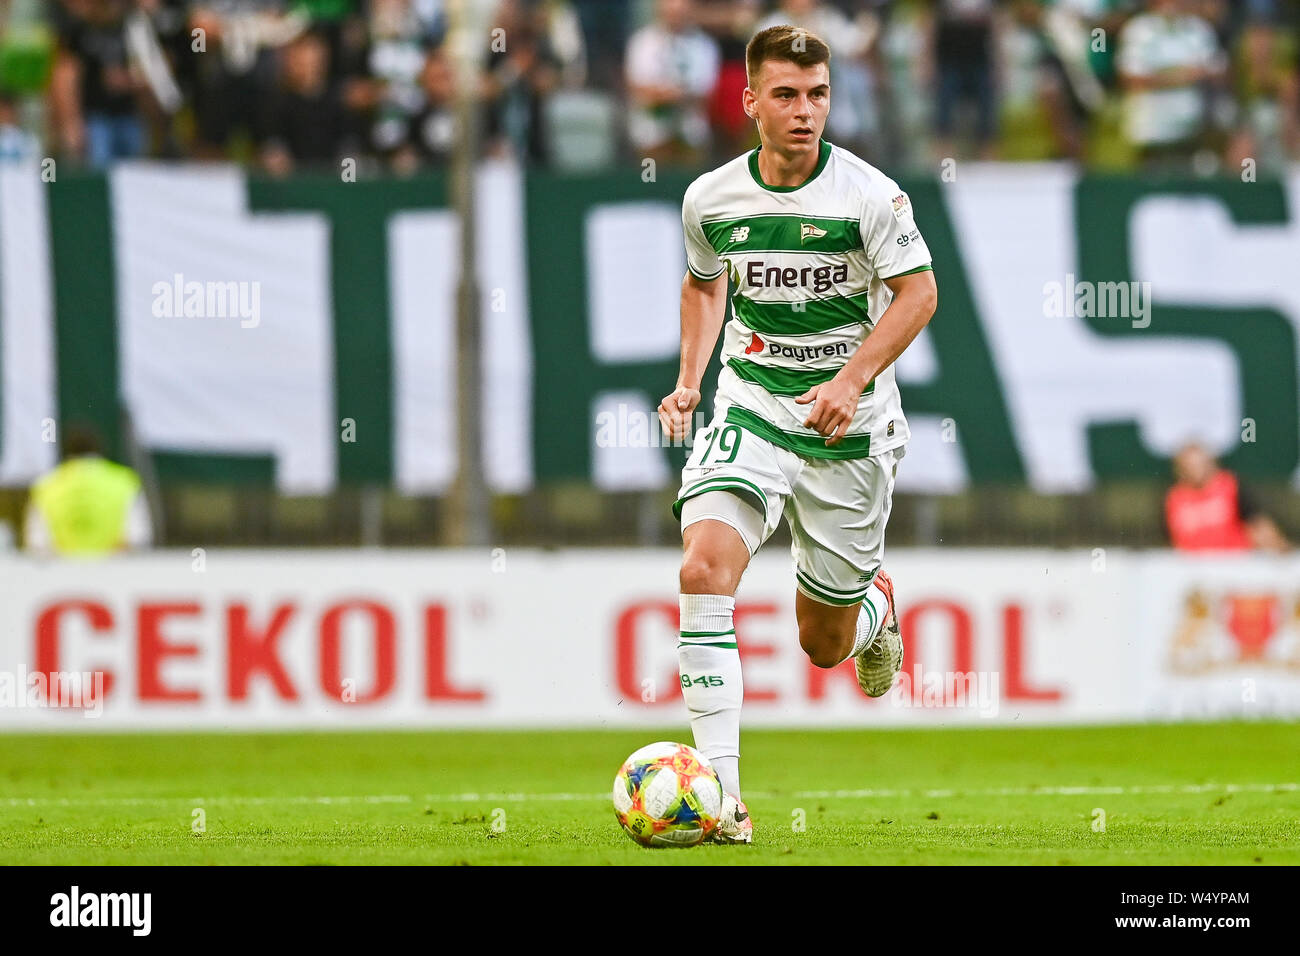 Karol Fila from Lechia Gdansk seen in action during the UEFA Europa League  Qualifiers match between Lechia Gdansk and Brondby IF at Energa  Stadium.(Final score; Lechia Gdansk 2:1 Brondby IF Stock Photo -